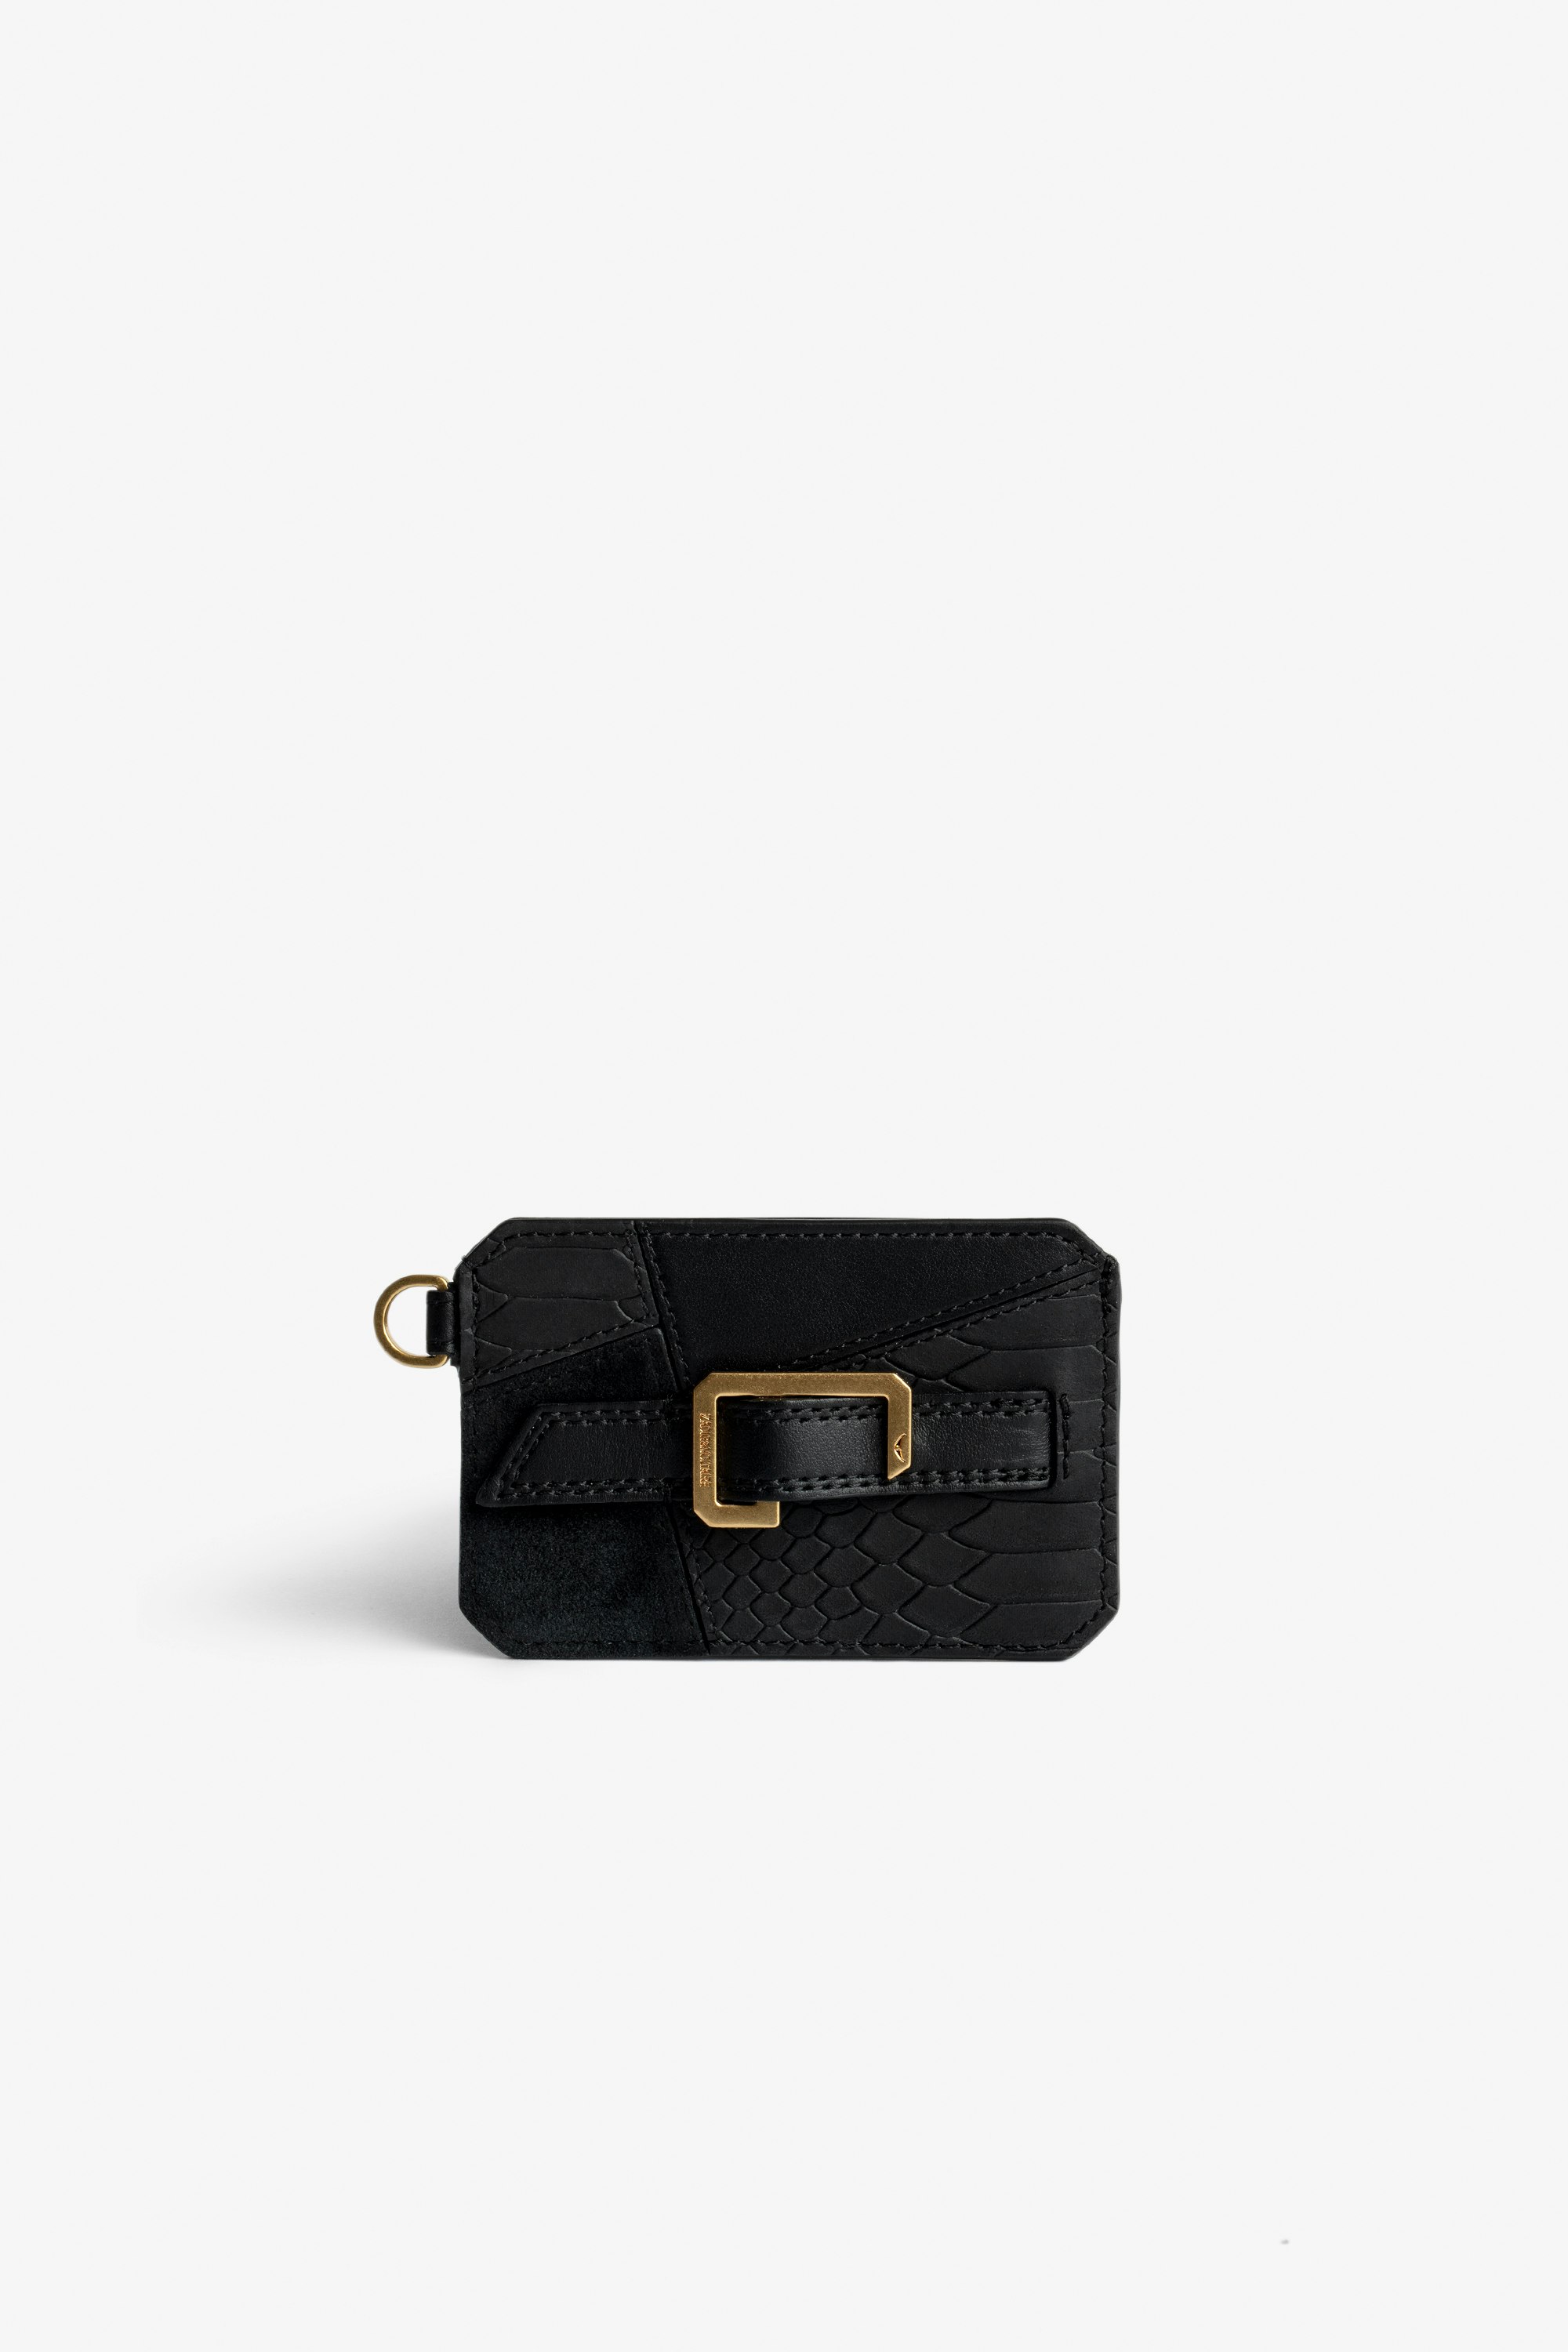 Le Cecilia Pass Card Case - Women's card case in black leather patchwork with a C-shaped gold-tone buckle.